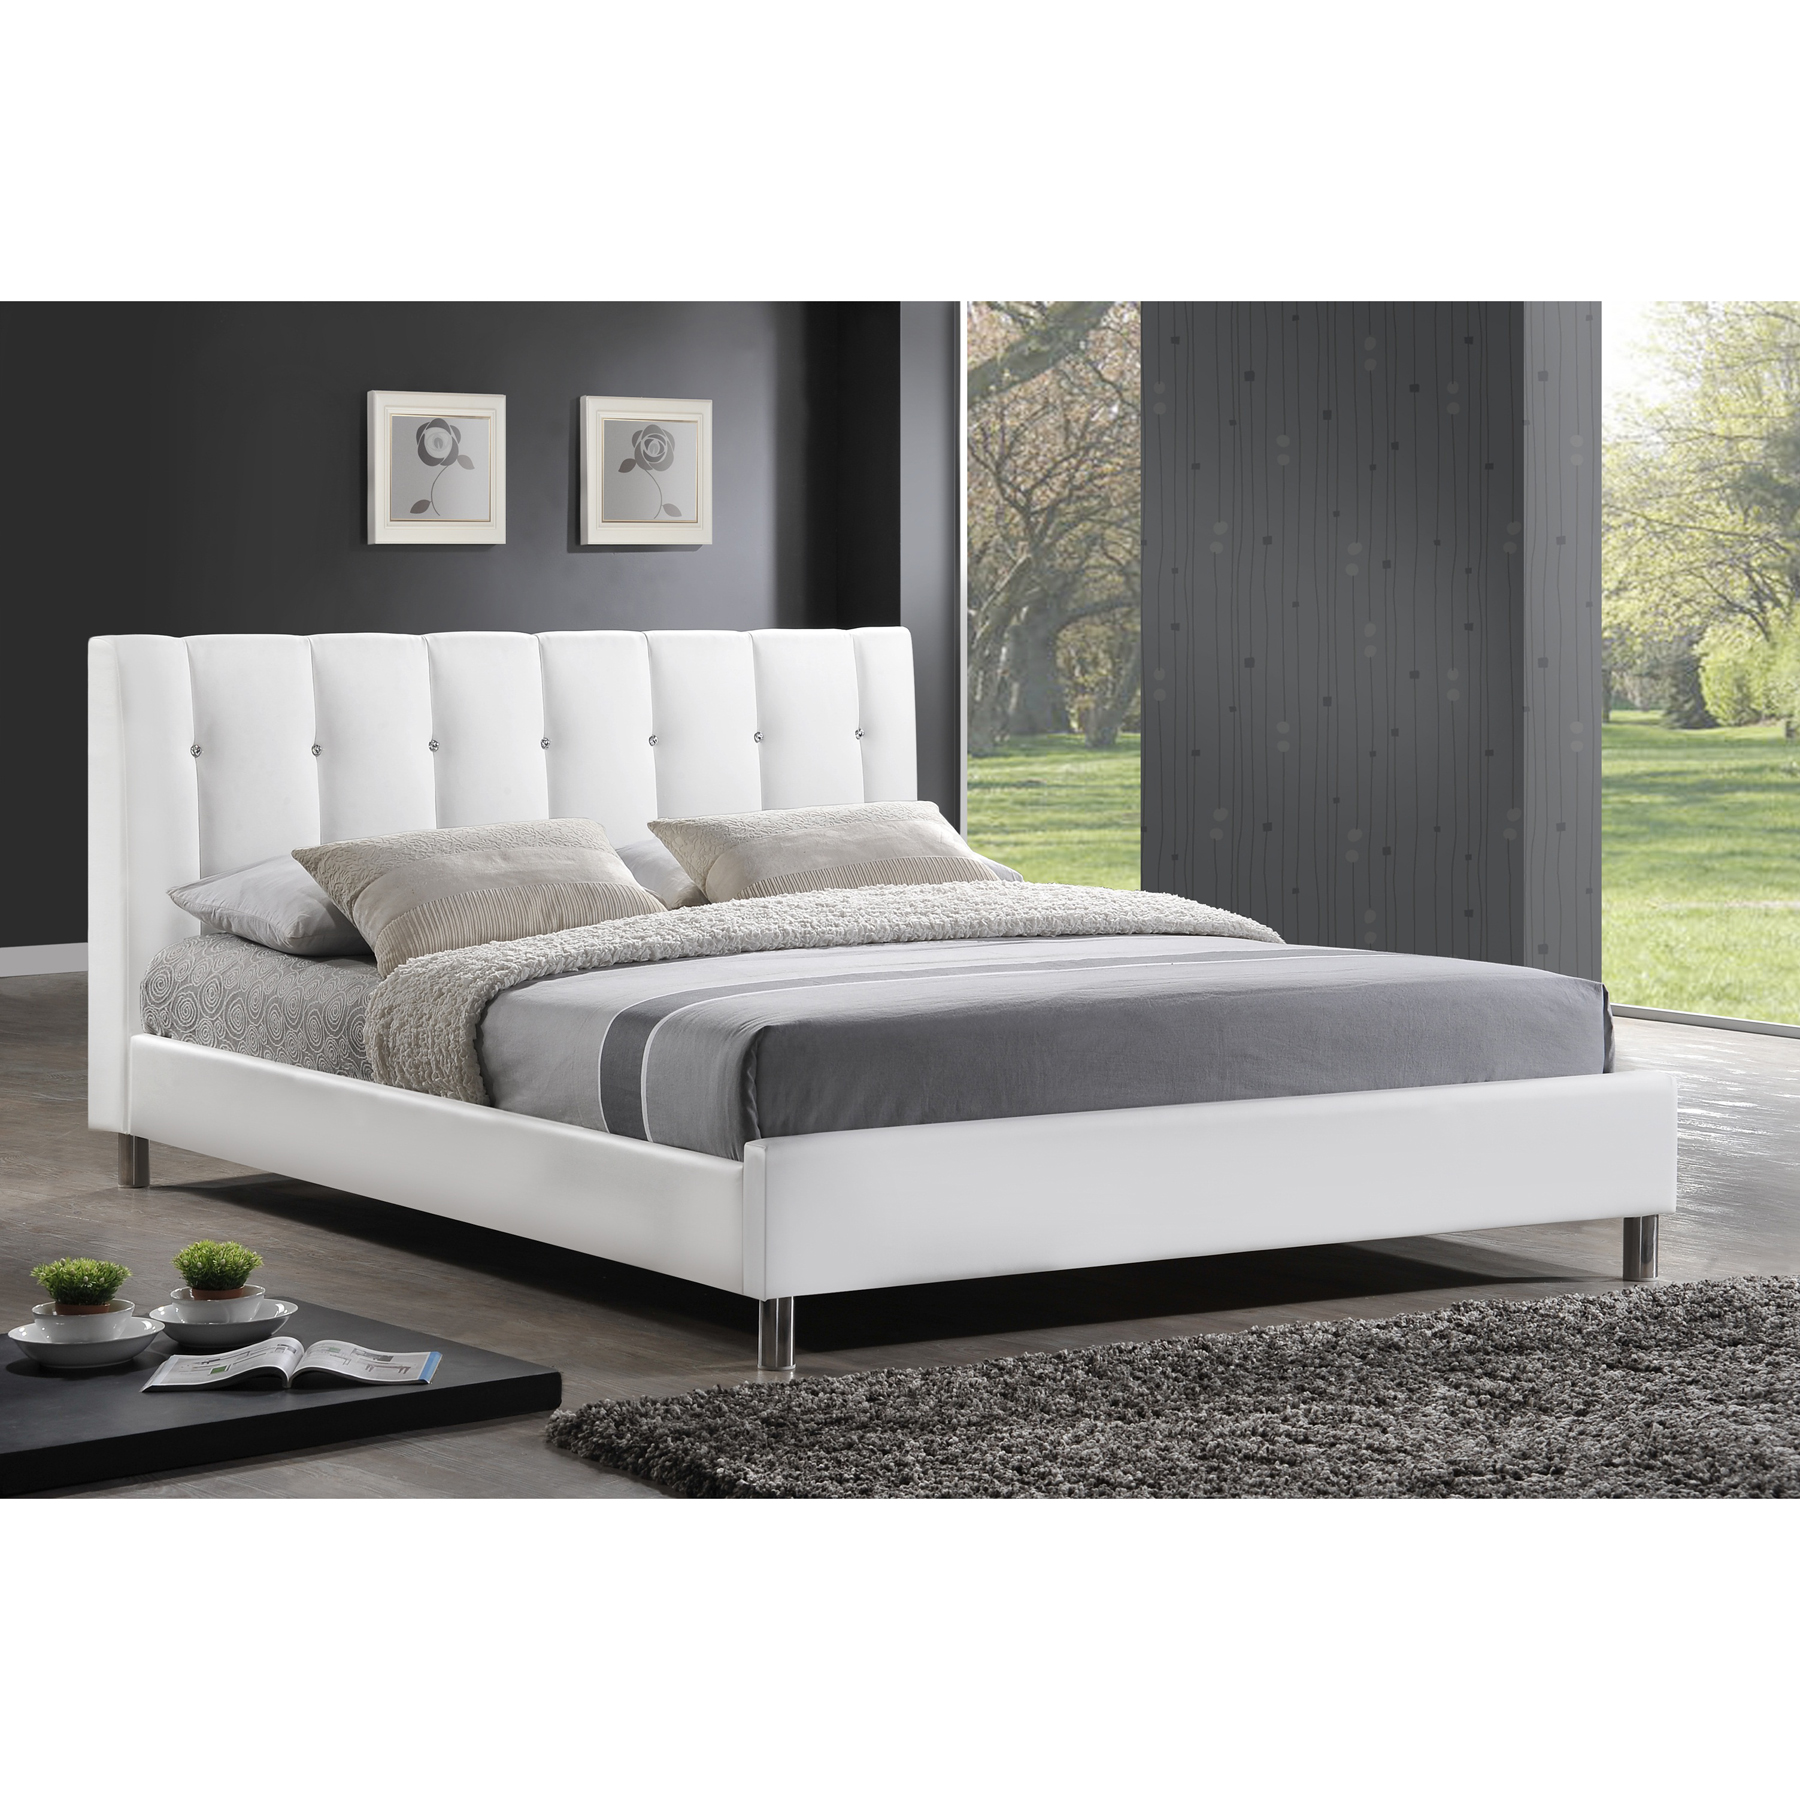 Baxton Studio Vino White Modern Bed with Upholstered Headboard - Queen Size